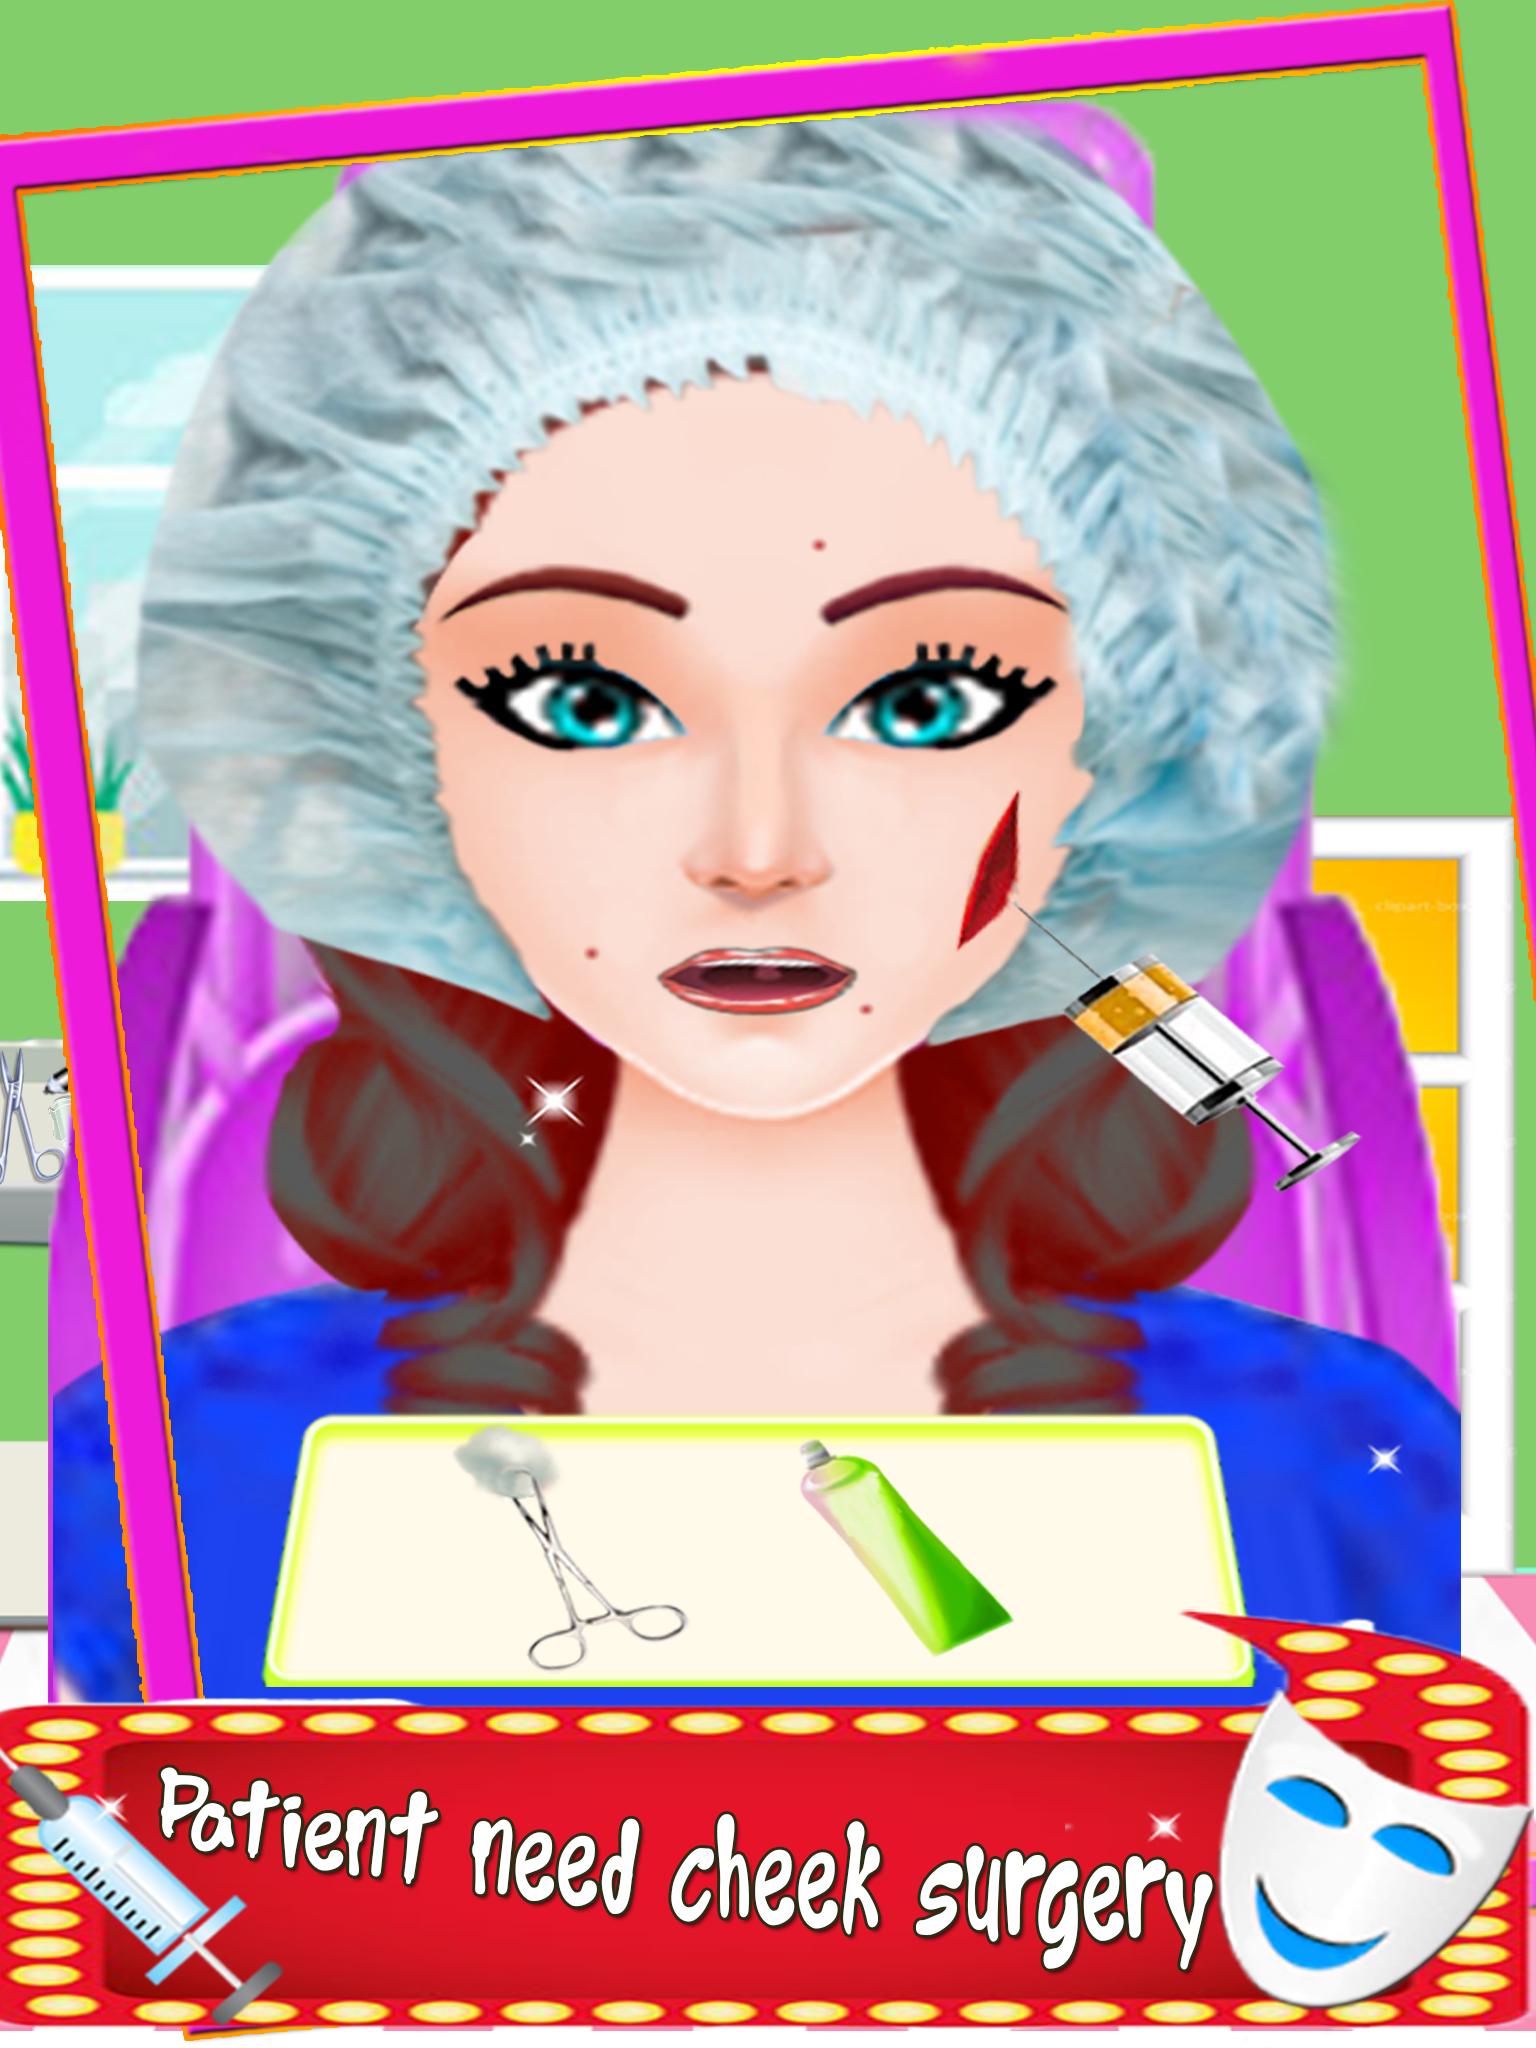 Face Plastic Surgery Simulator for Android APK Download